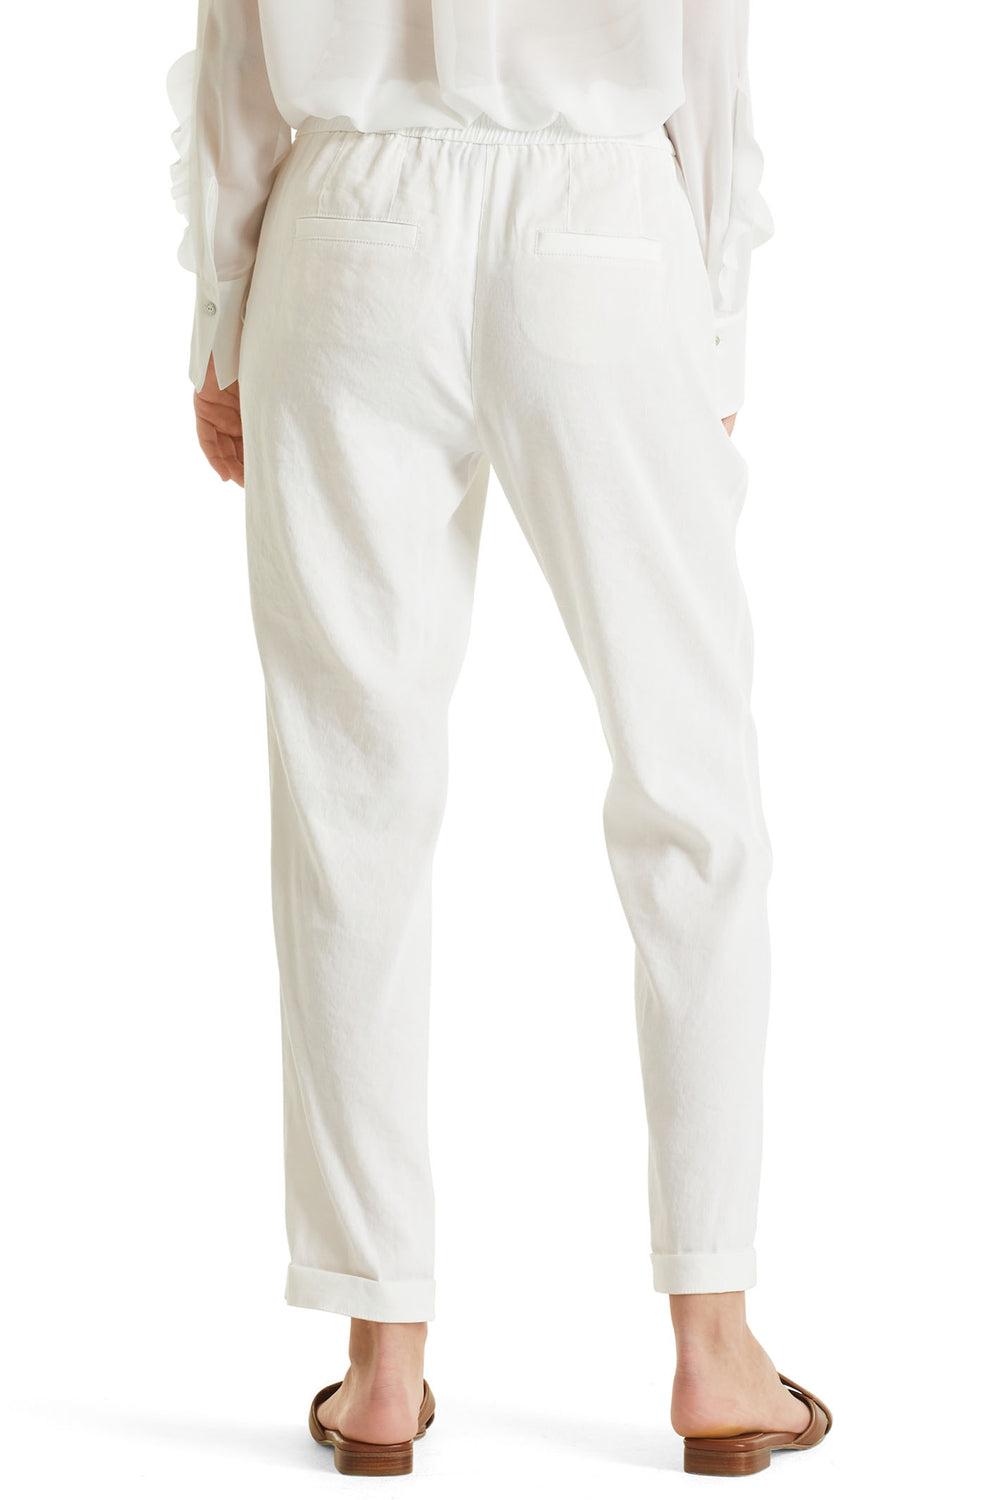 Marc Cain Collections WC 81.59 W47 110 Off White Pull-On Linen Mix Trousers - Olivia Grace Fashion